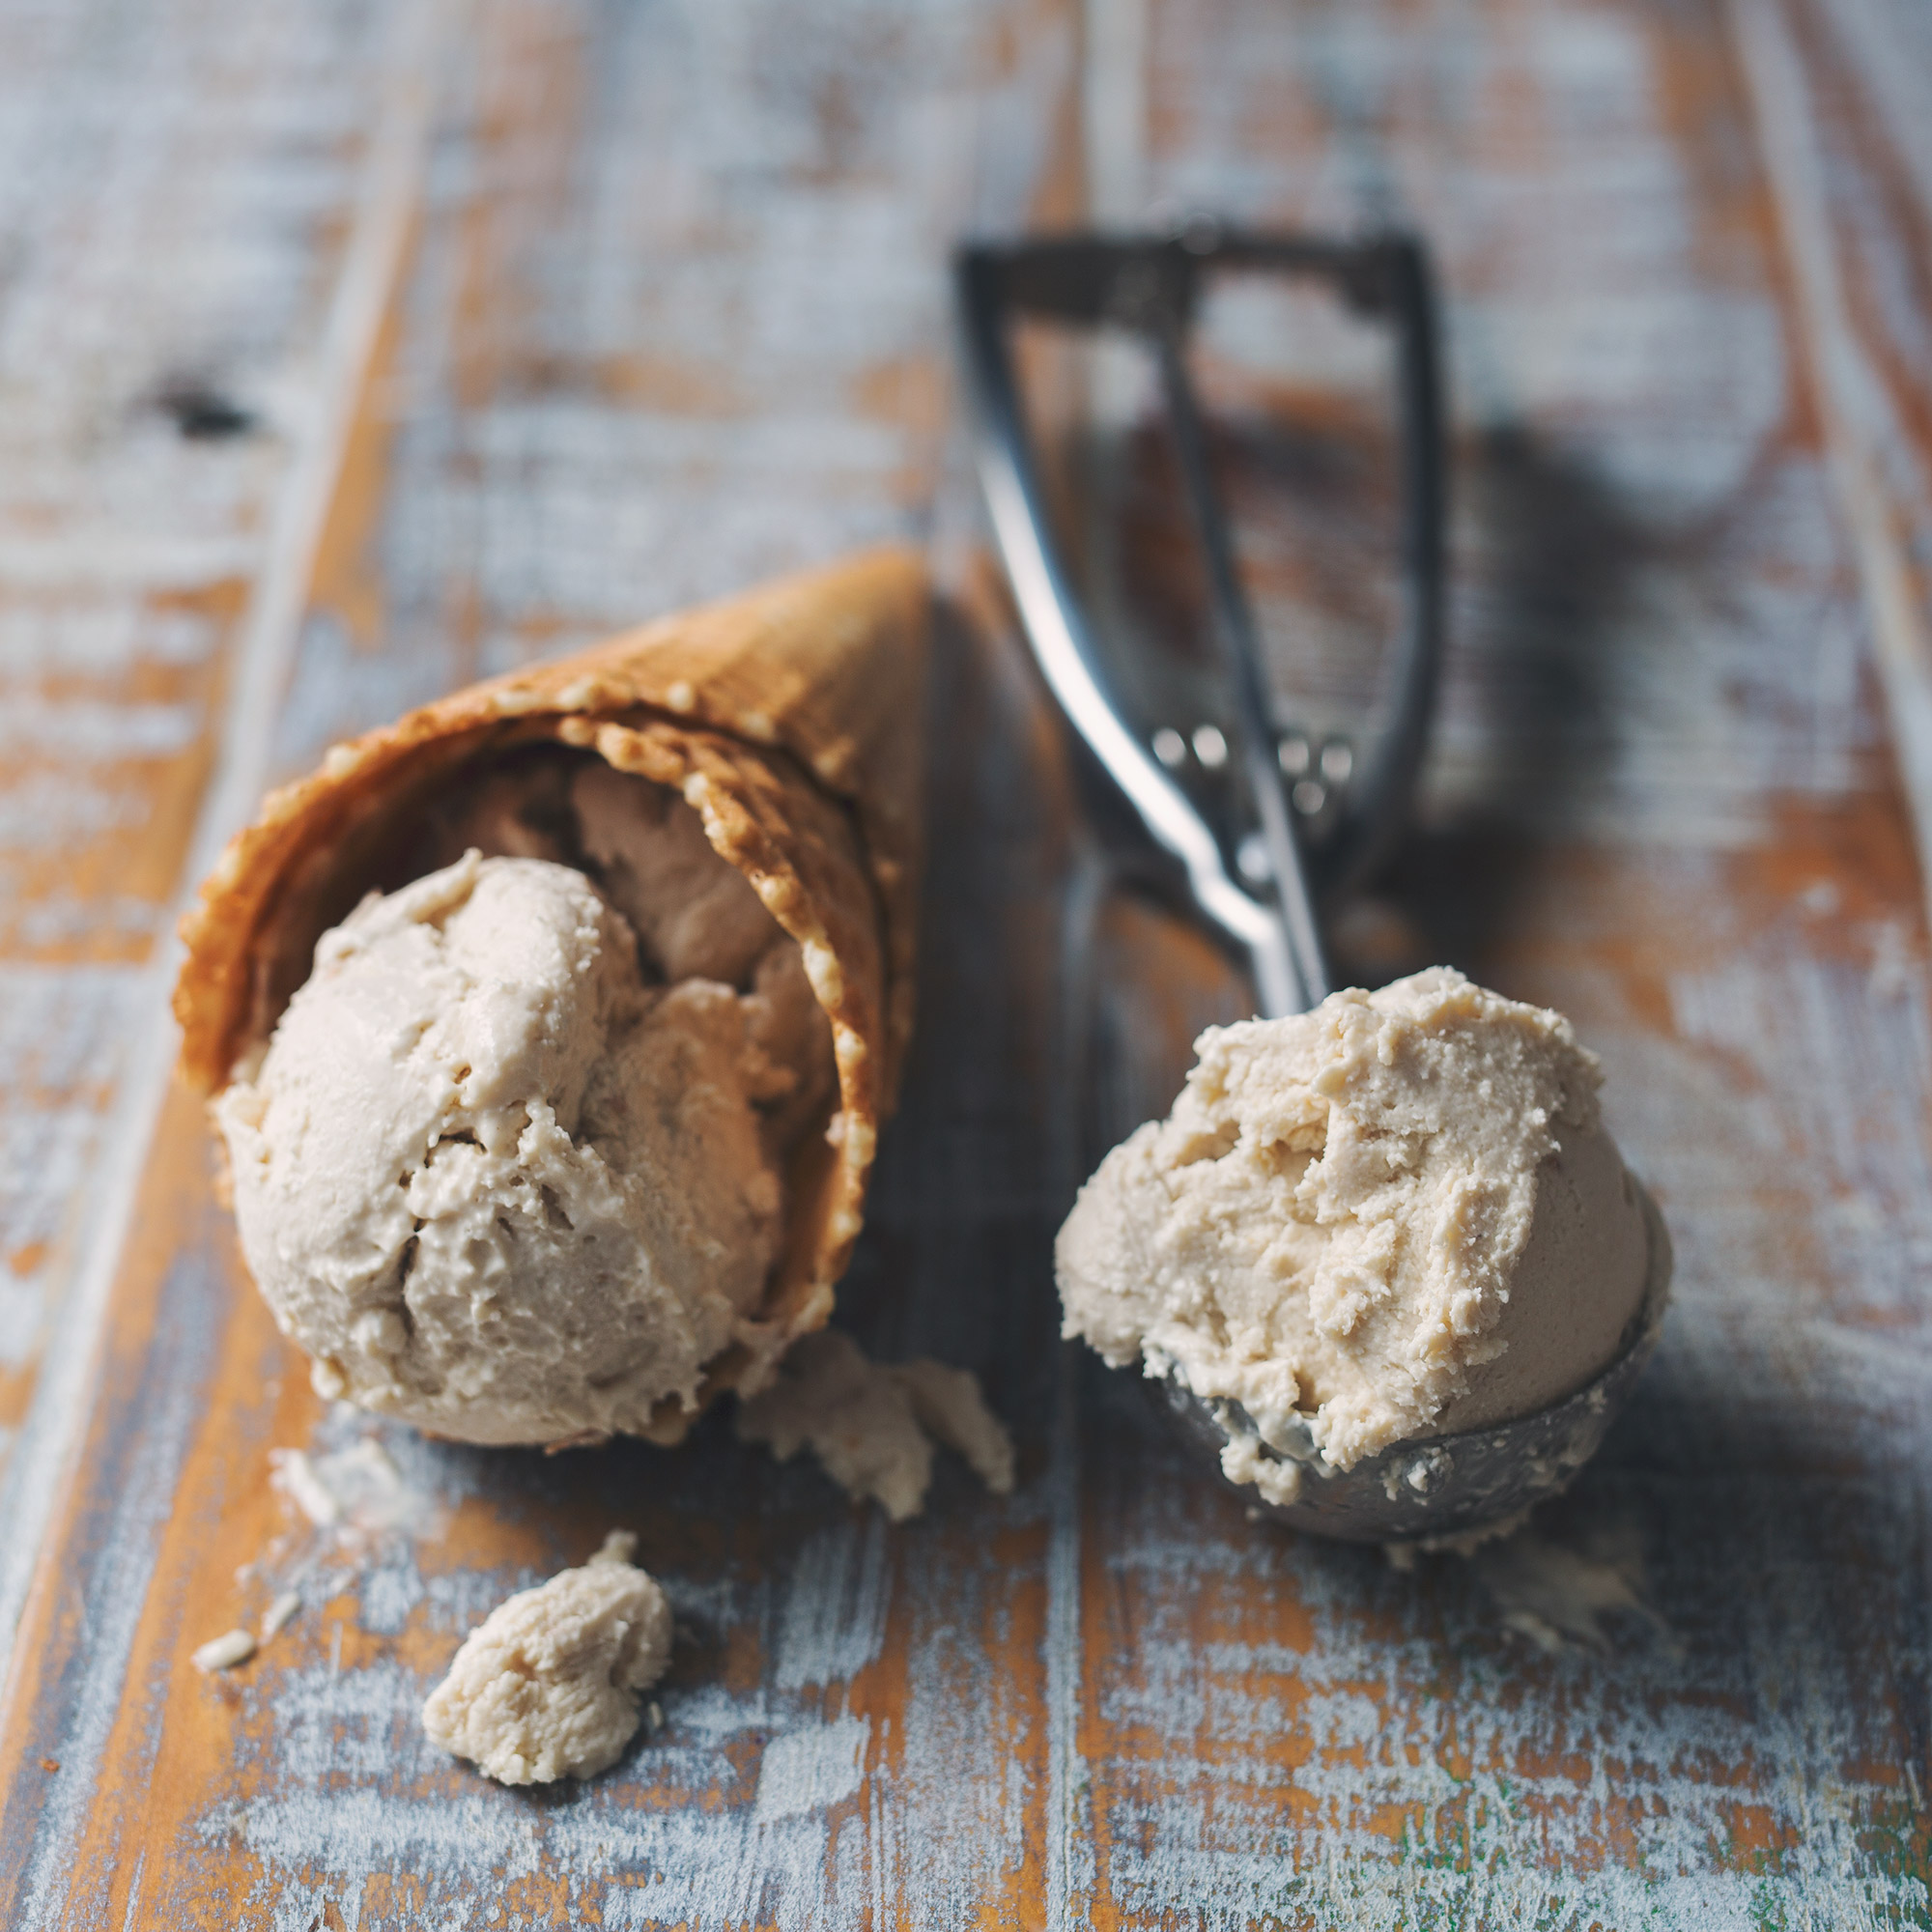 Coconut and Lychee Dairy Free Ice-cream